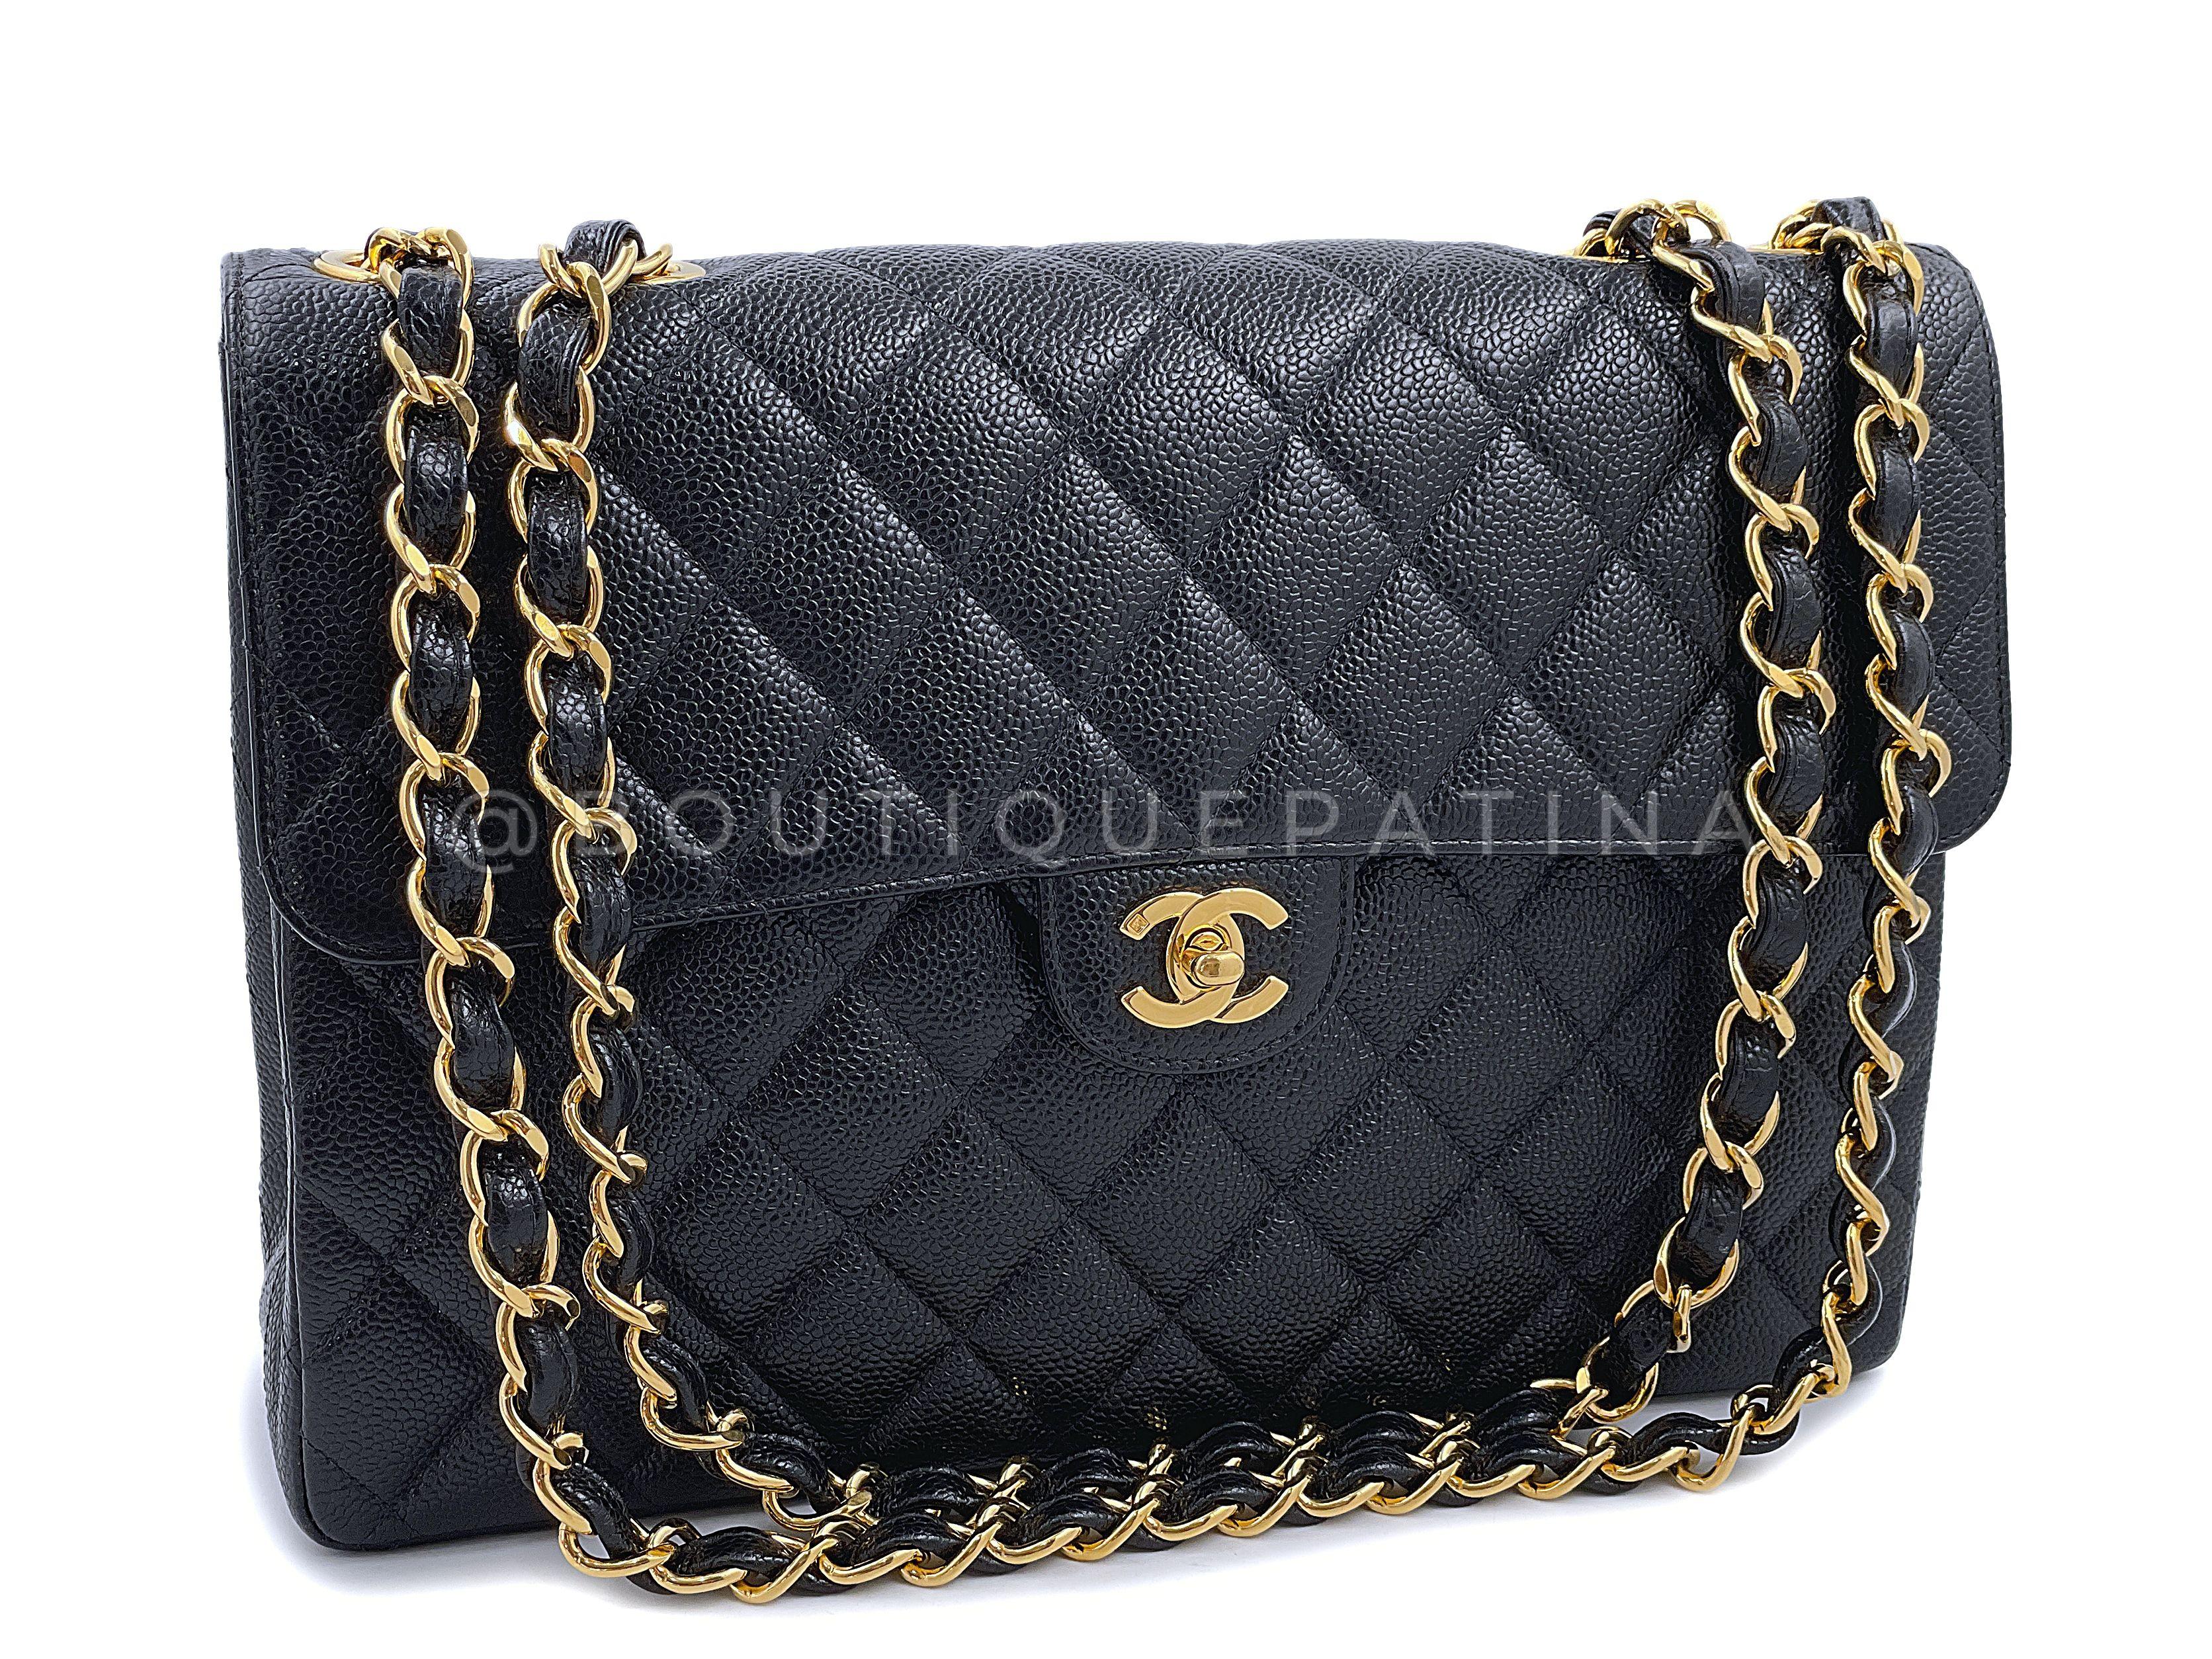 Store item: 67313
The iconic holy grail bag is the Chanel Classic Flap. Coveted for its simplicity and elegance - woven chain double strap that can be worn short or long, turnlock CC clasp, lambskin interior.

This is the single size classic flap,